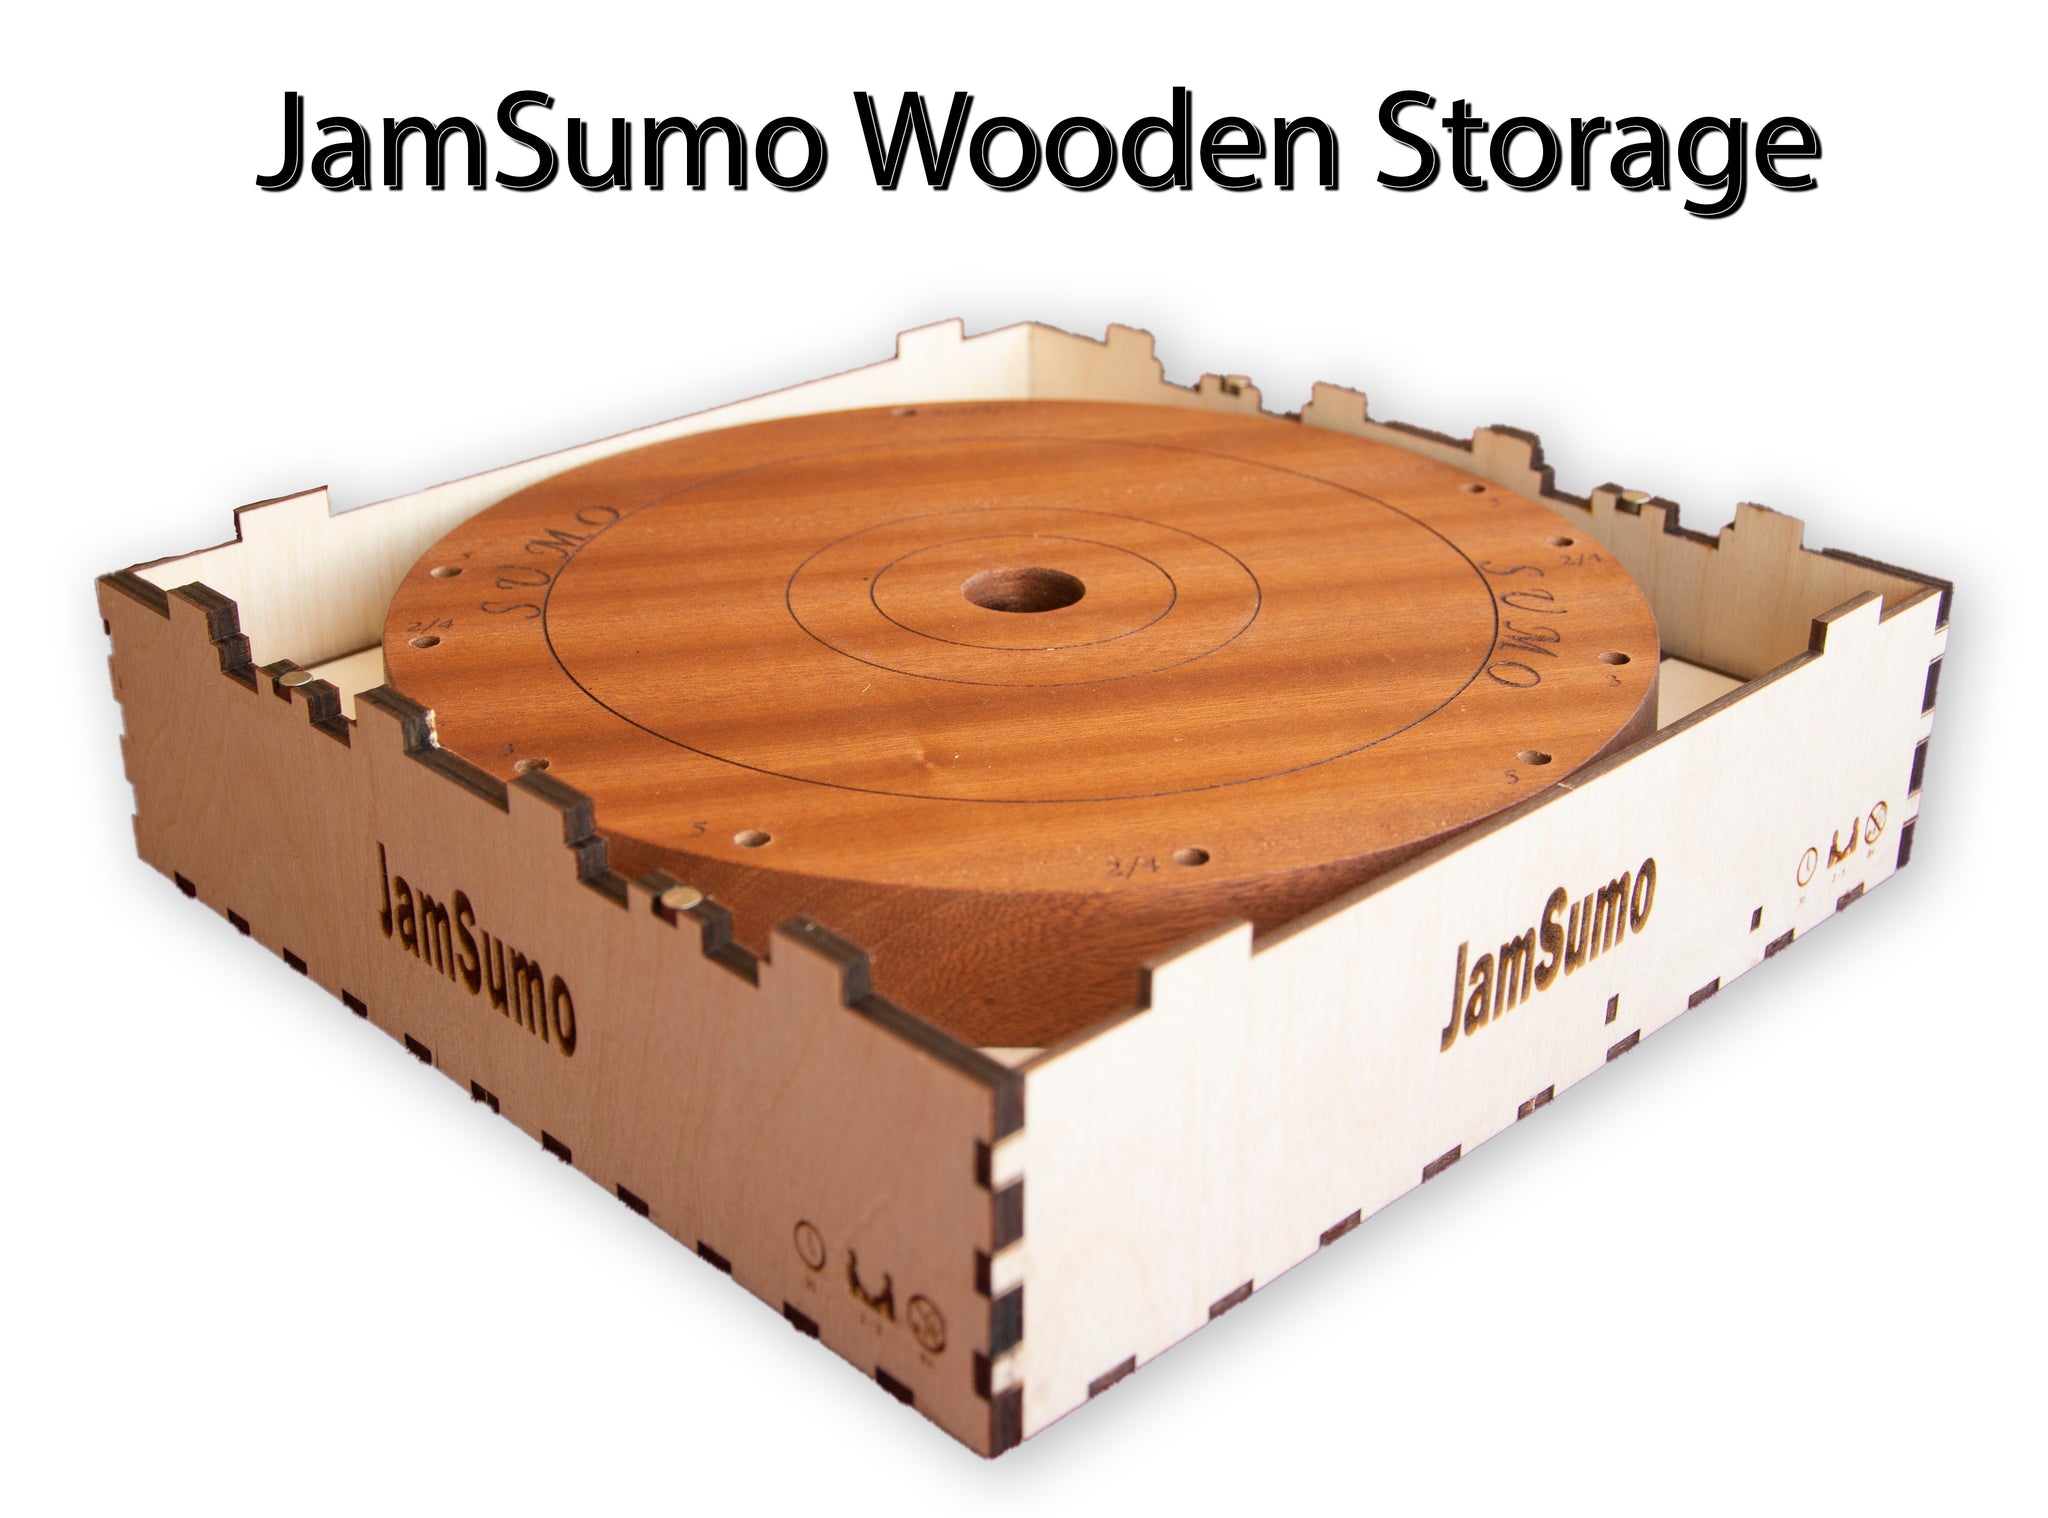 JamSumo "5th Year Anniversary" Wooden Storage Solution - The Nifty Organizer